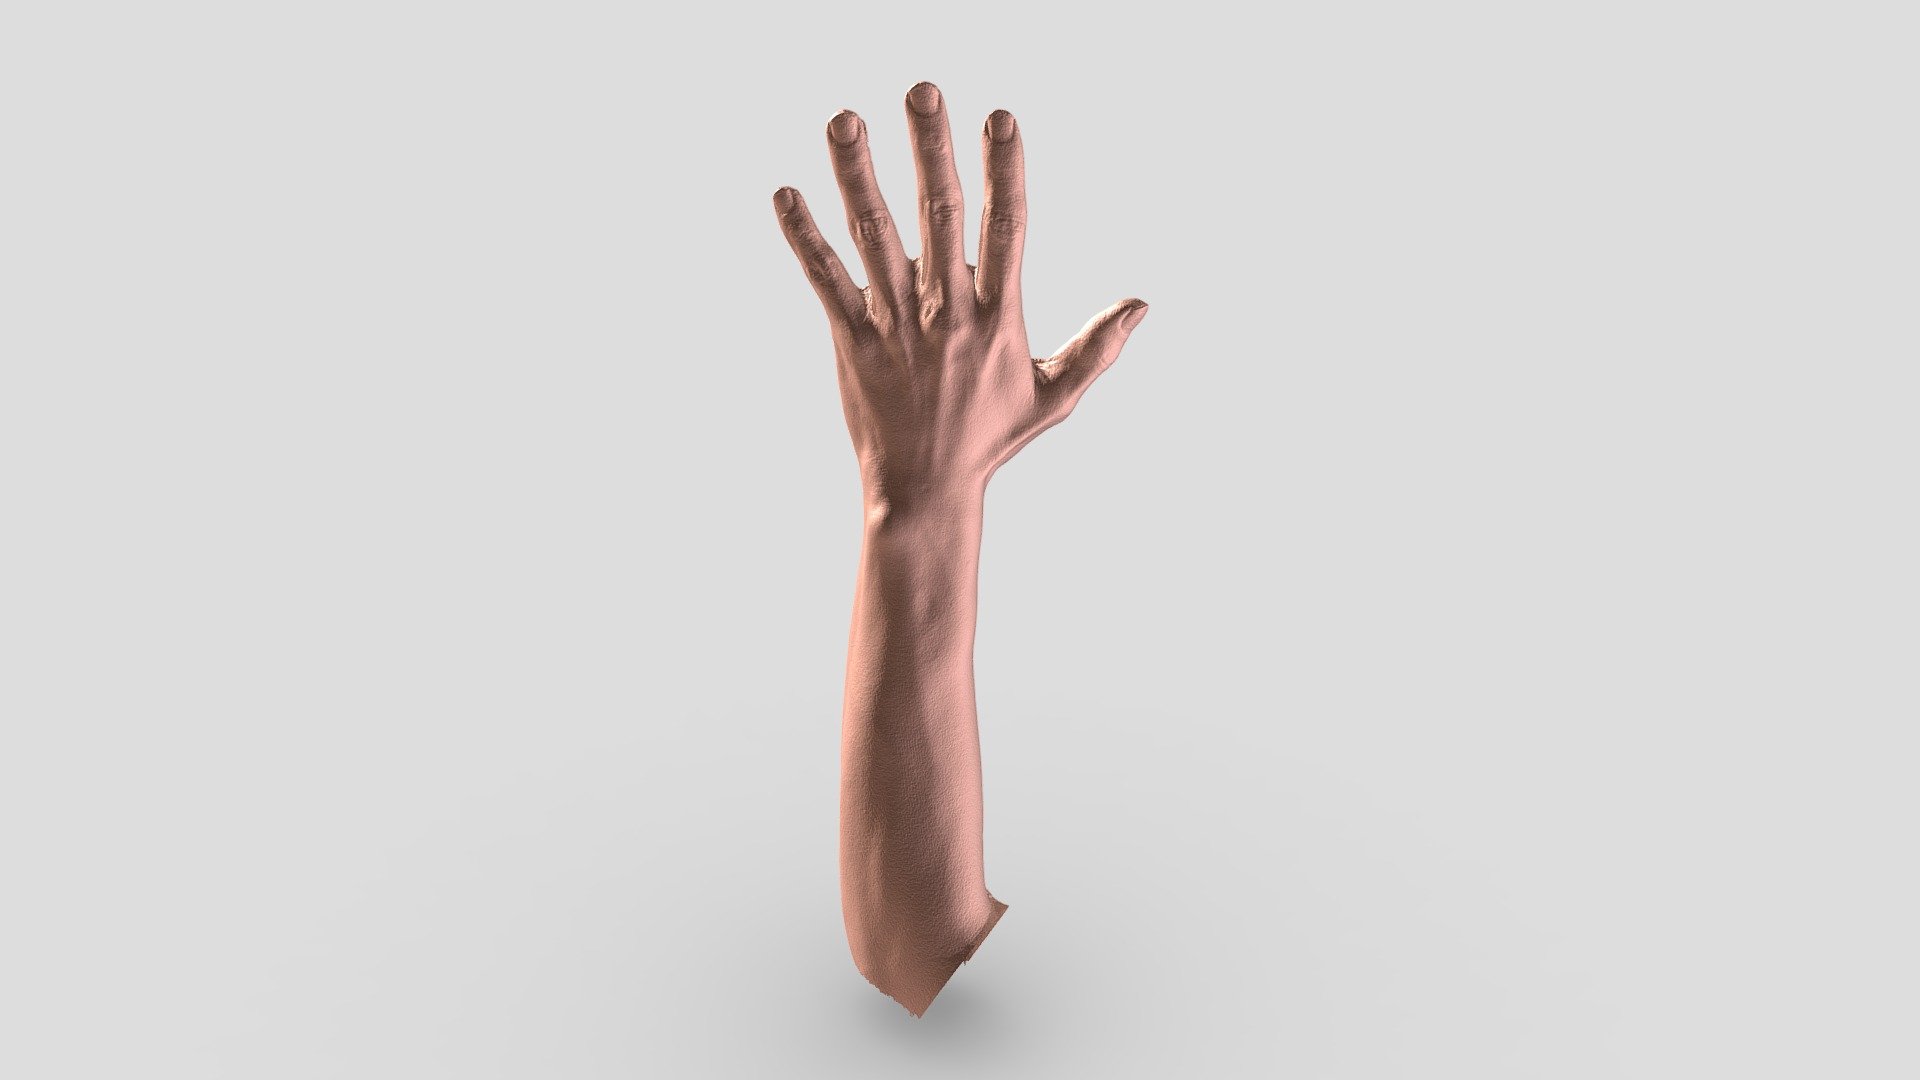 7,723 Skinny Arm Images, Stock Photos, 3D objects, & Vectors